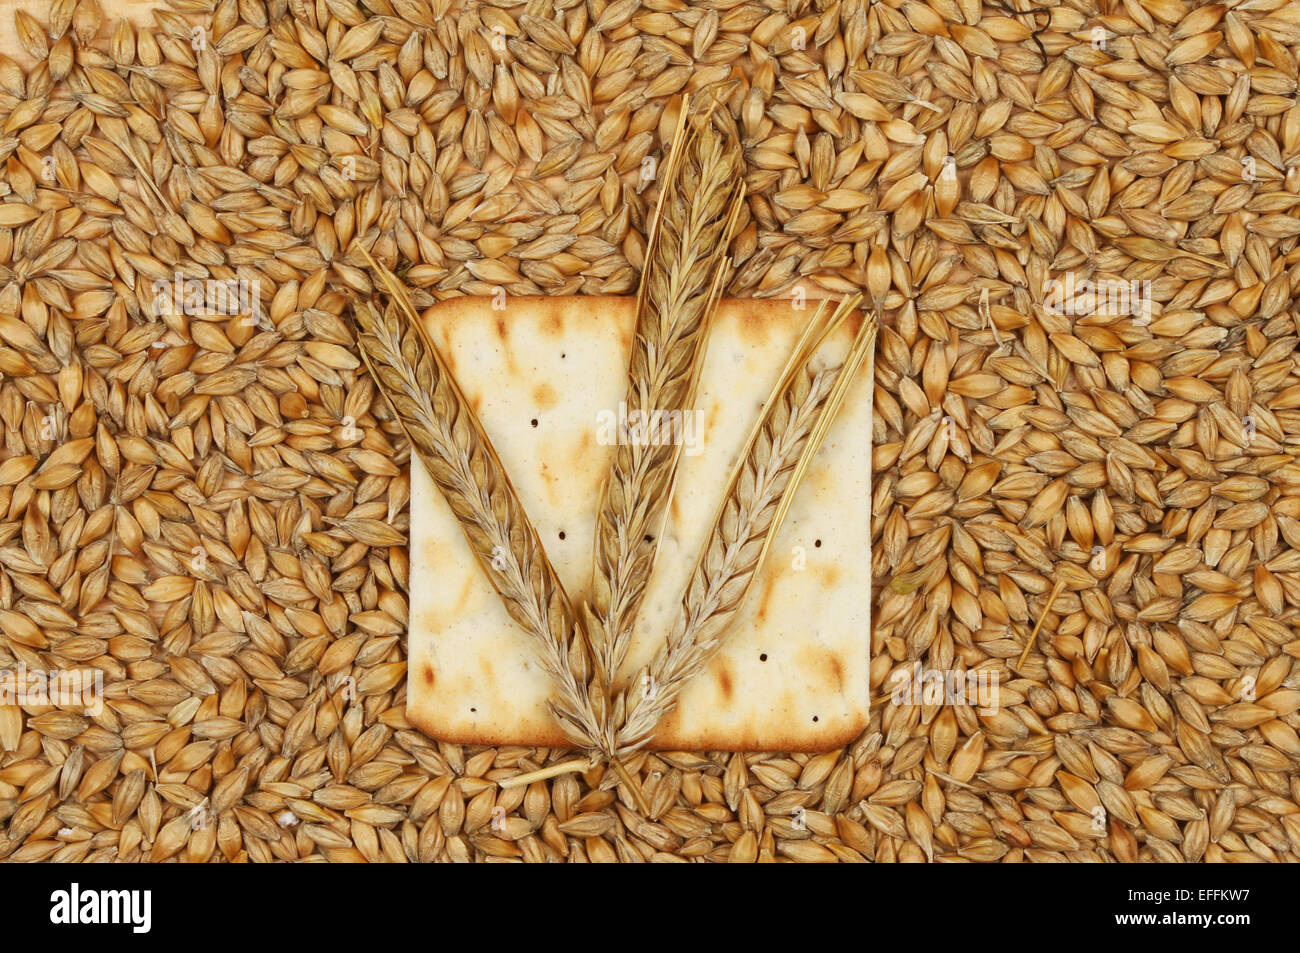 Ears of wheat on a biscuit surrounded by grains of wheat Stock Photo